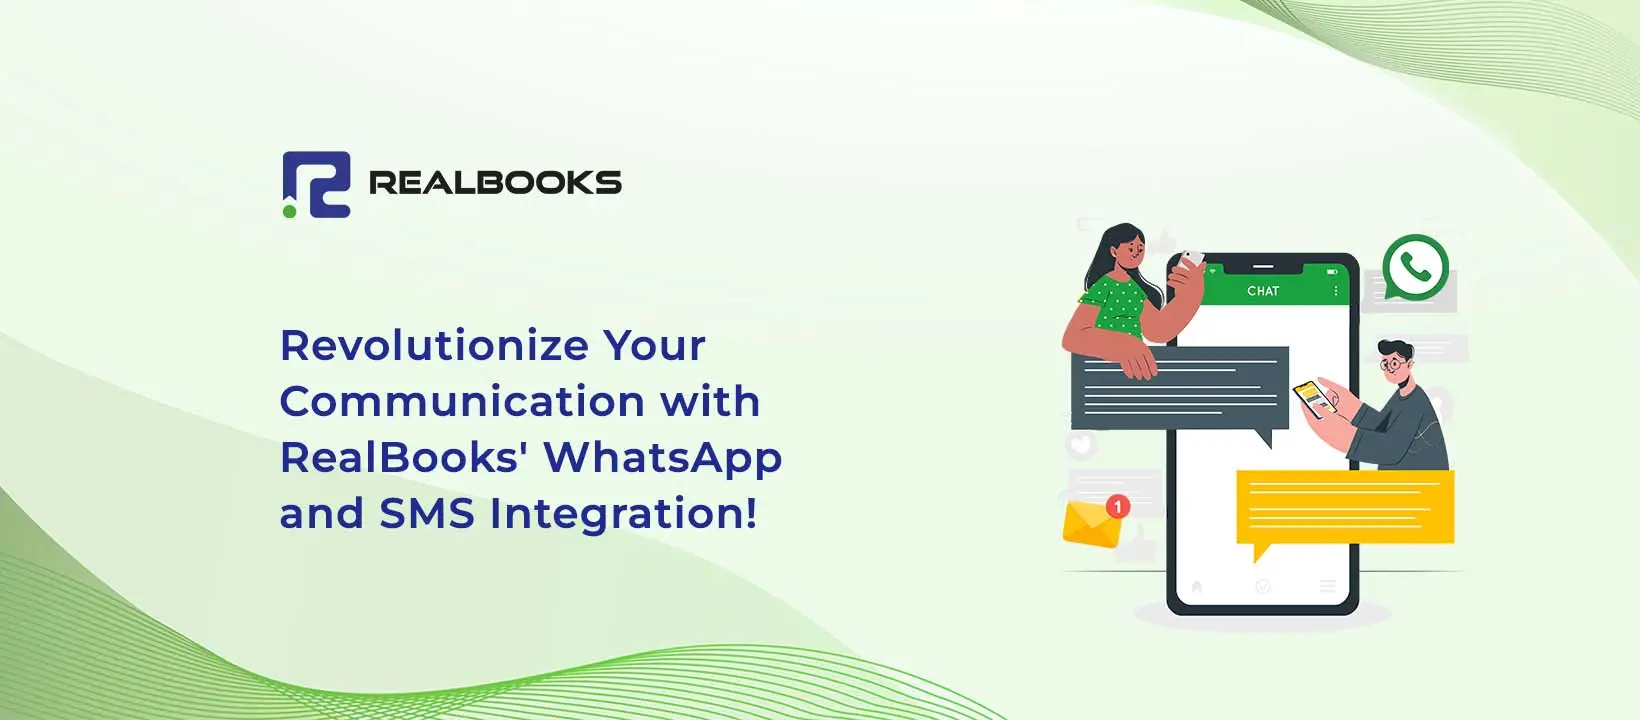 Revolutionize Your Communication with RealBooks’ WhatsApp and SMS Integration! 🚀